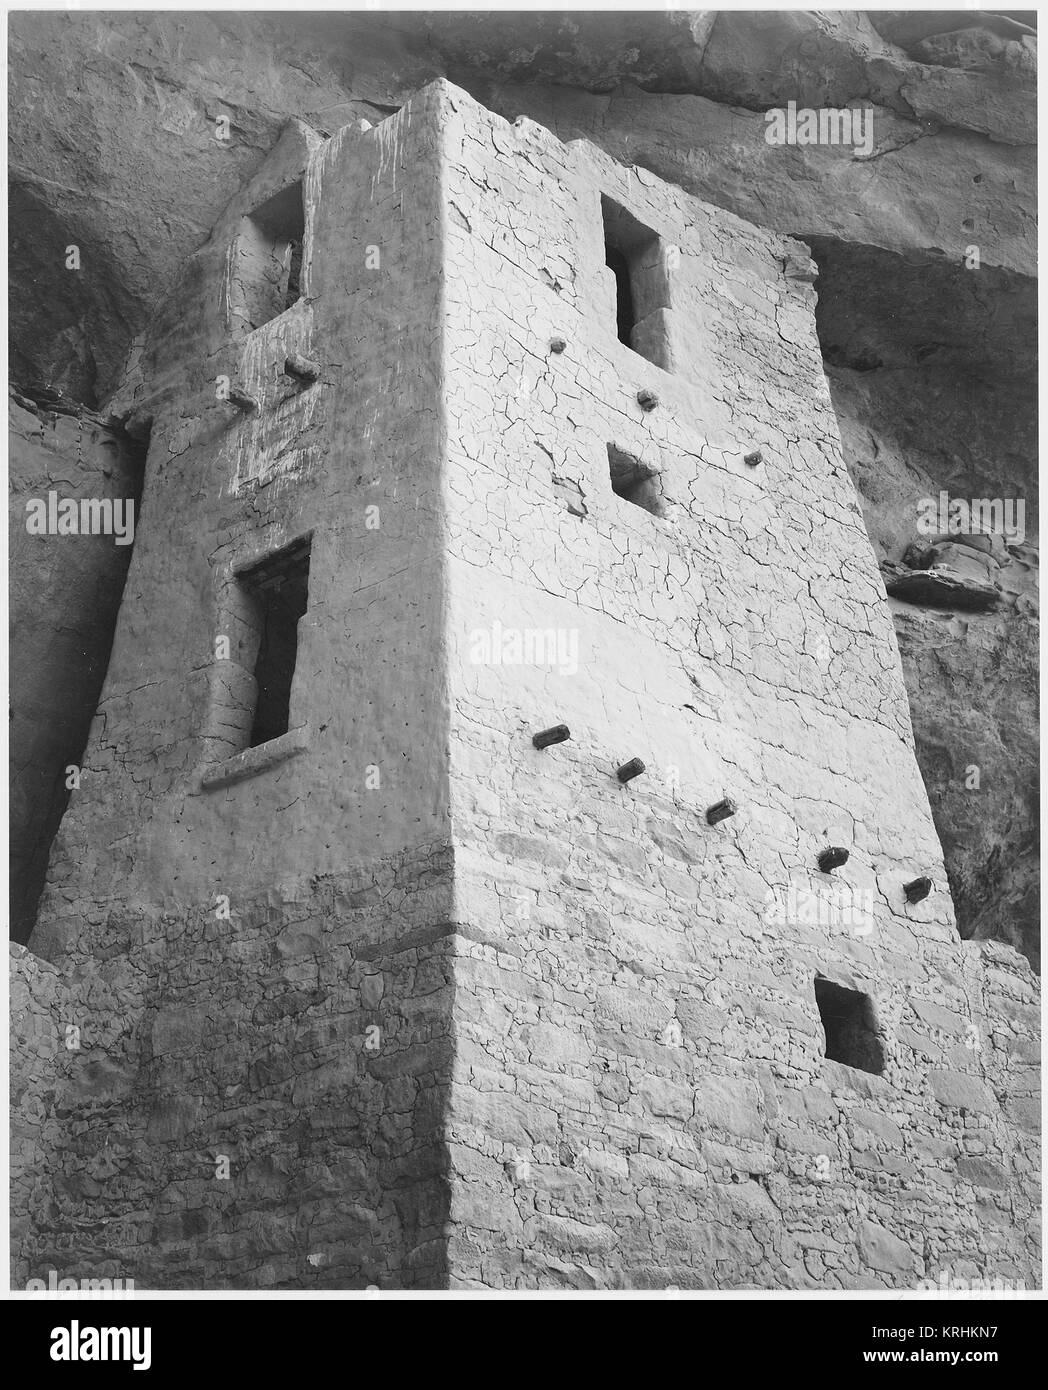 View of tower taken from above 'Cliff Palace Mesa Verde National Park' Colorado. (Vertical Orientation) 1933 - 1941 Stock Photo